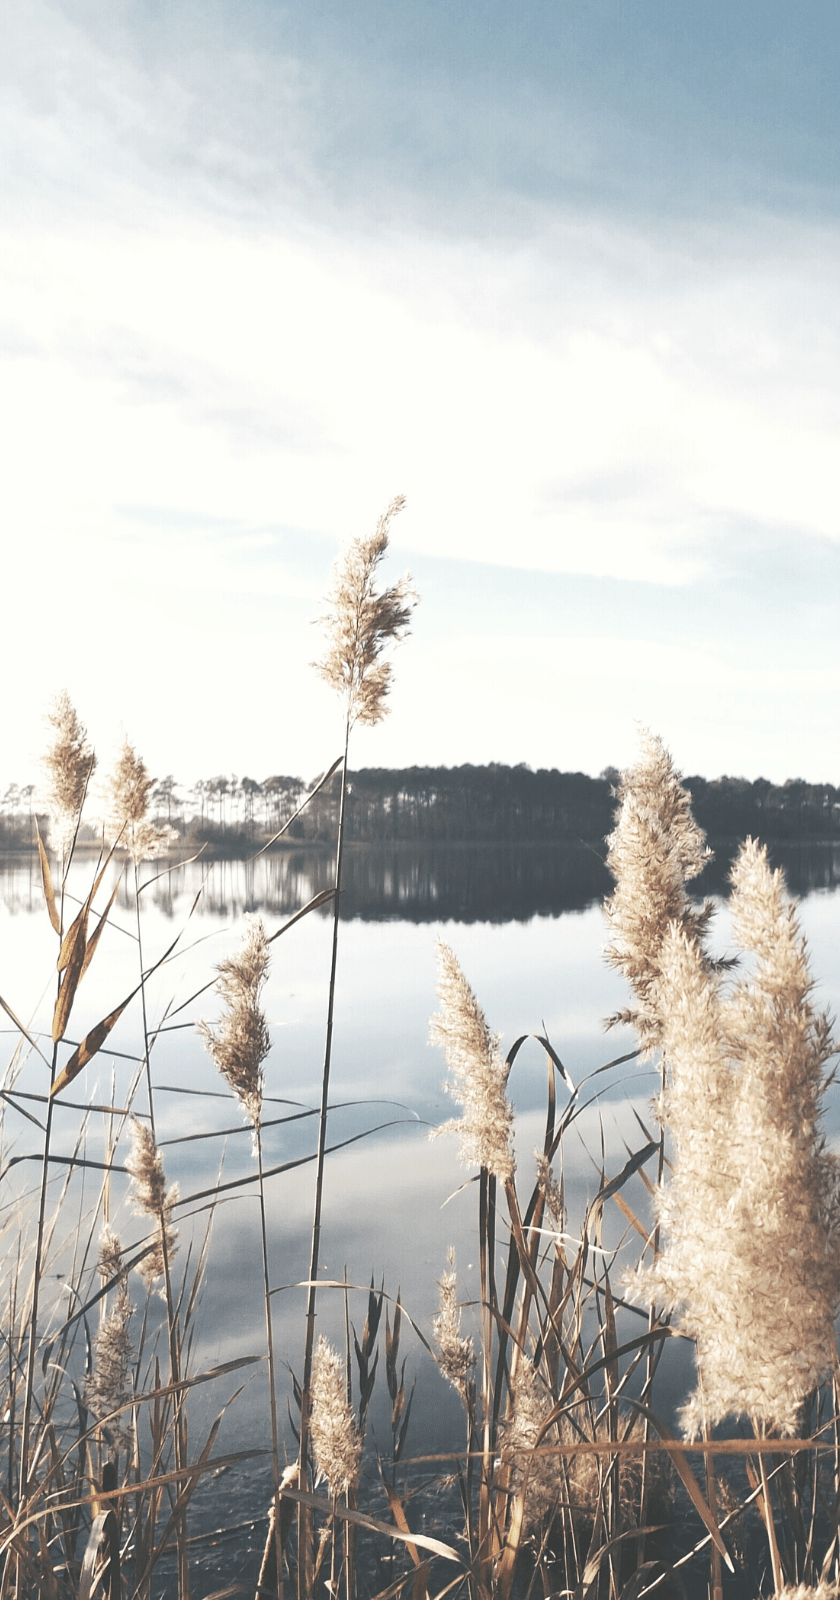 A photo of tall grass in front of a body of water. - Nature